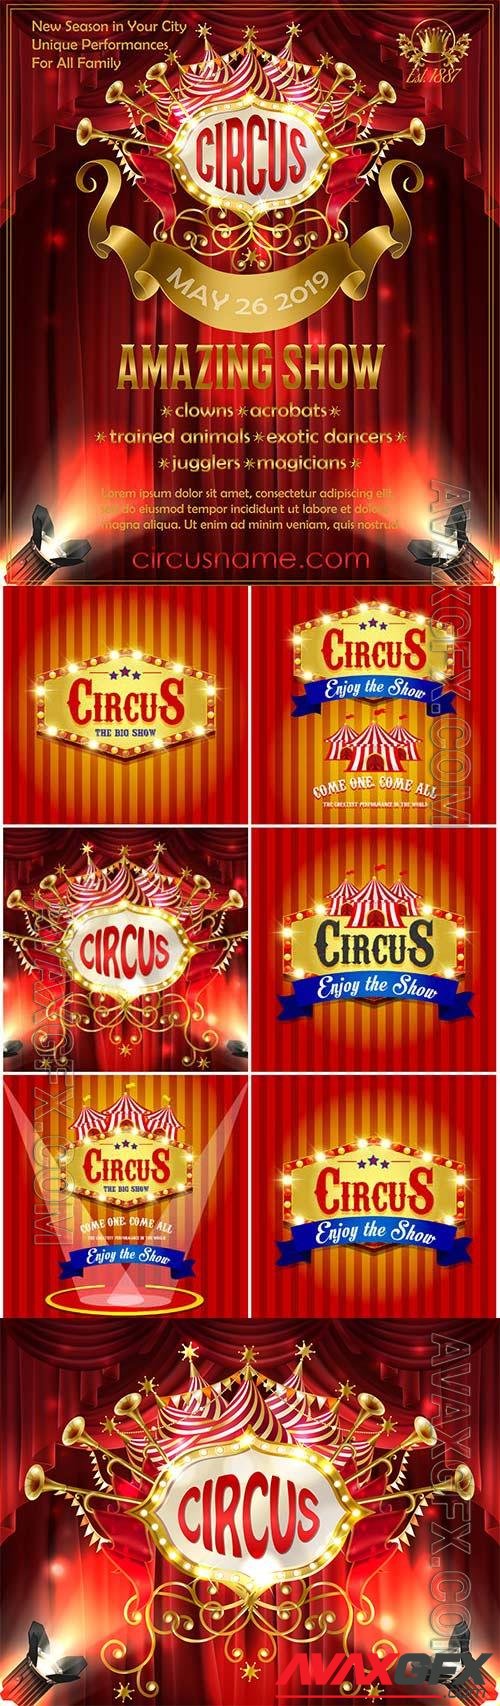 Circus, vector posters